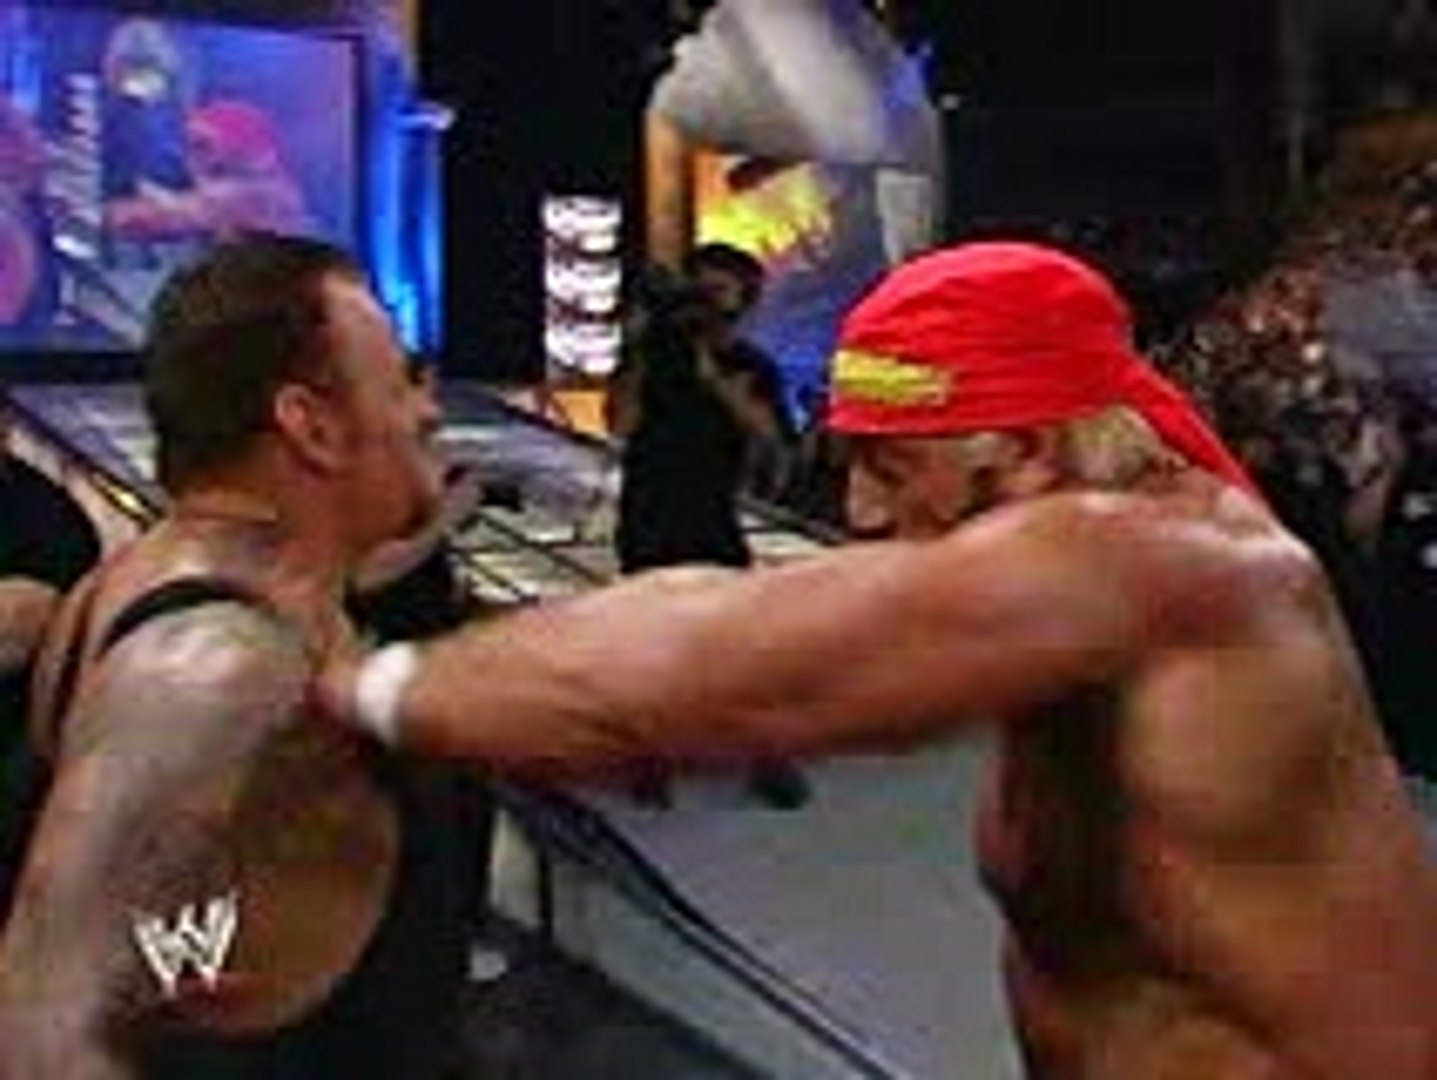 Bygge videre på Grudge Scorch WWE Judgment Day 2002 - Undisputed Championship Match: Hollywood Hulk Hogan  vs The Undertaker - Vídeo Dailymotion